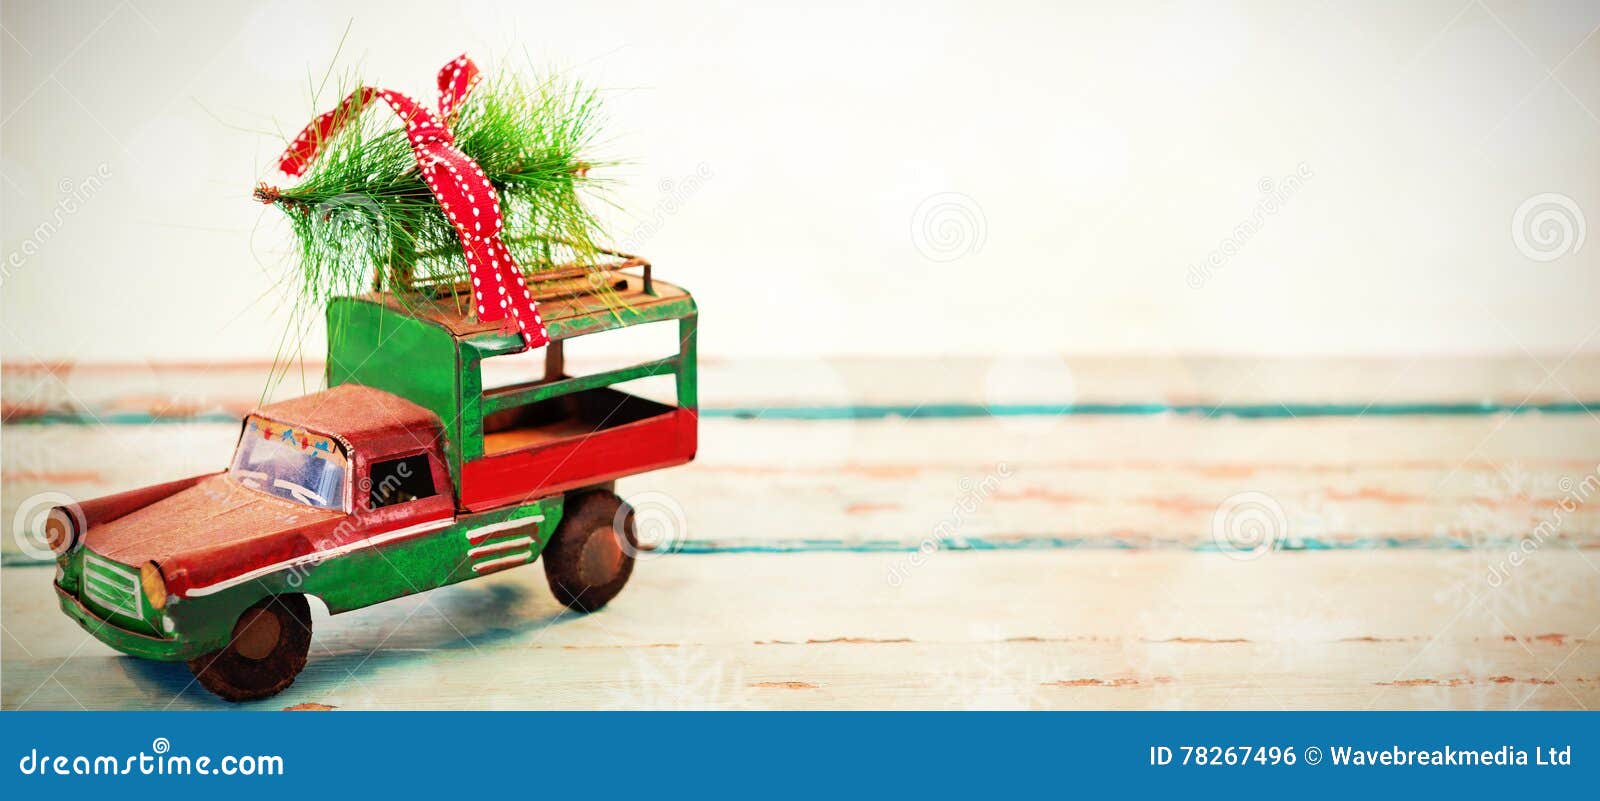 toy tempo carrying christmas fir on wooden plank